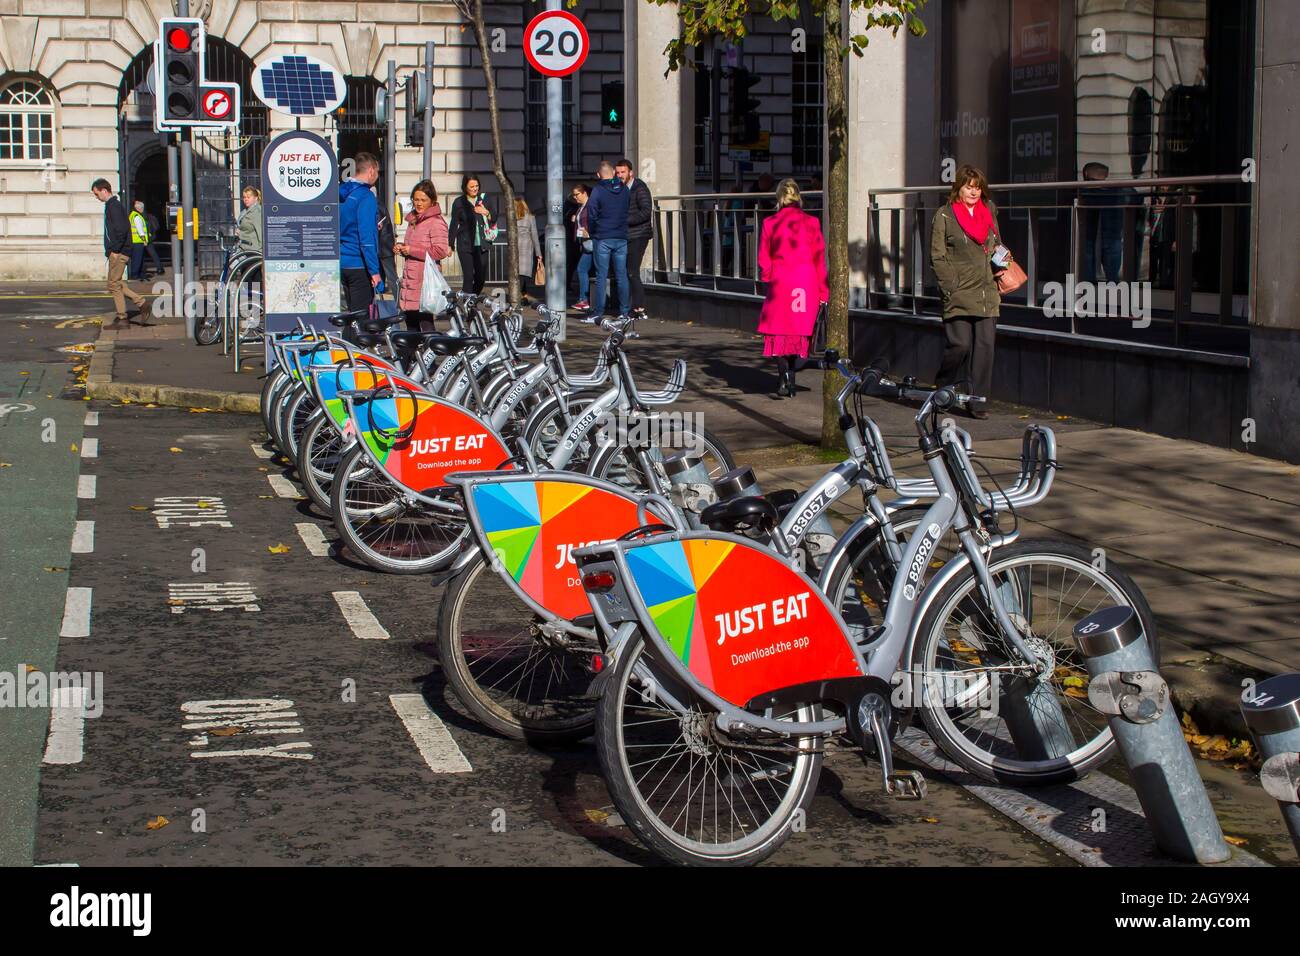 16 October 2019 A row of Bicycles with the Just Eat sponsors logo available for hire in Linenhall Street Belfast Northern Ireland Stock Photo